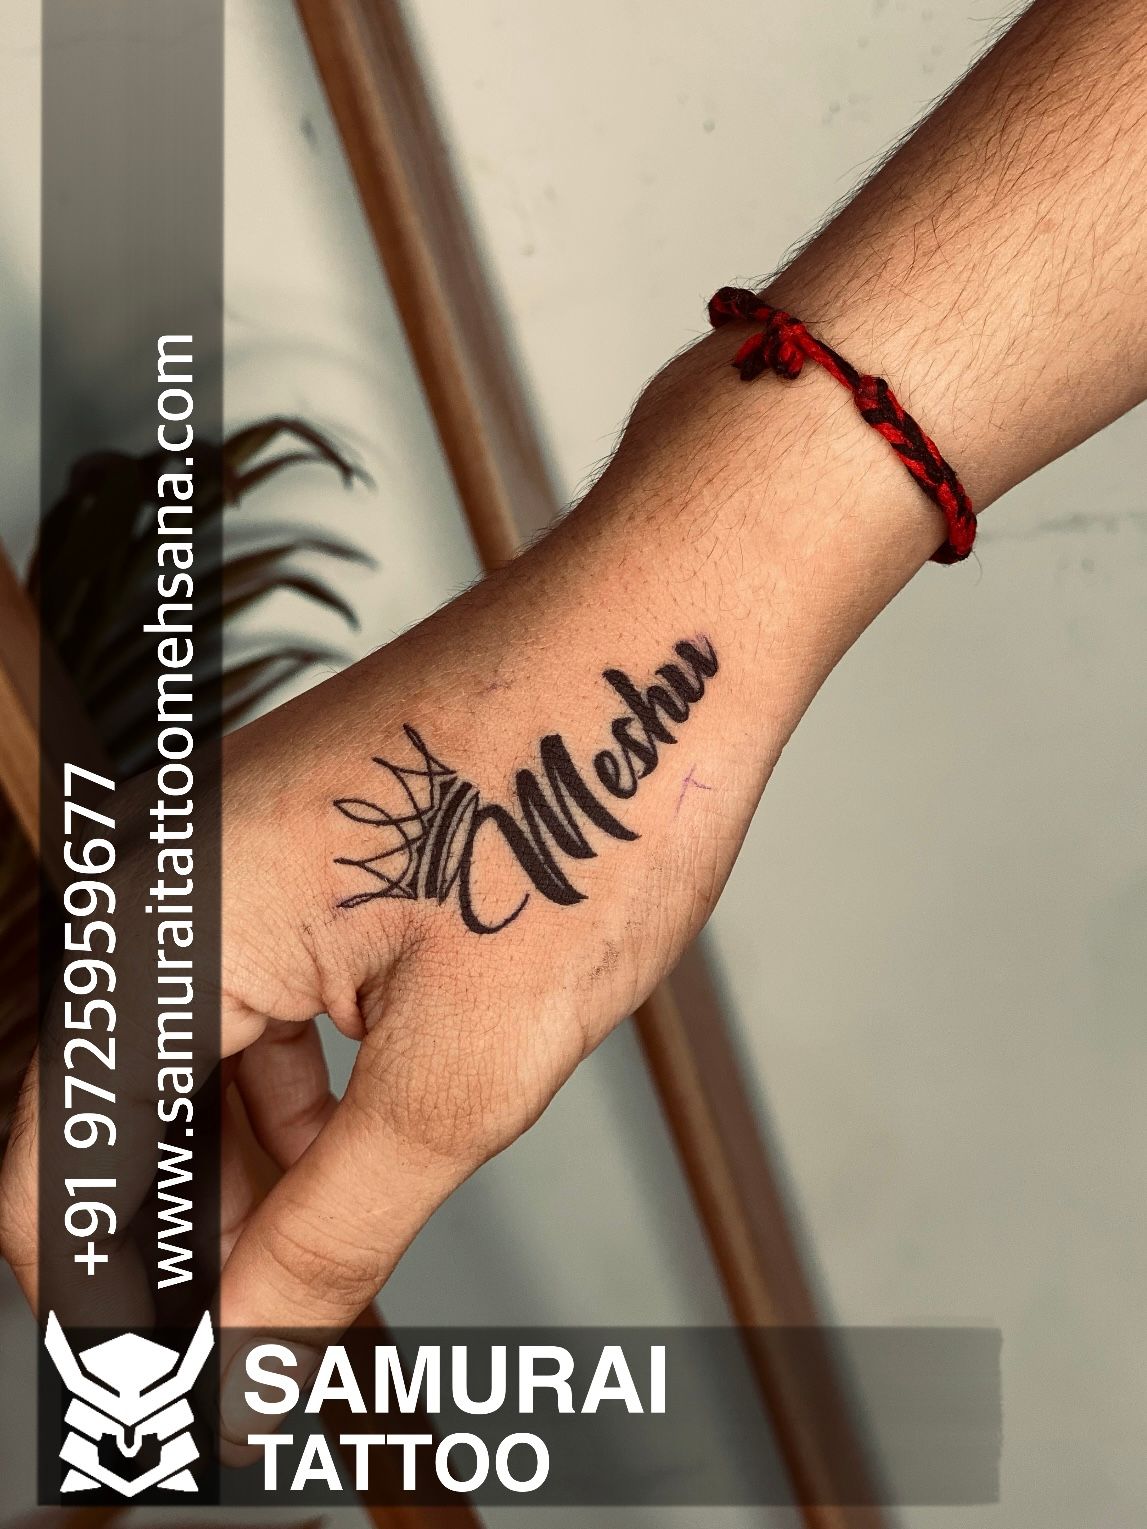 Tattoo uploaded by Vipul Chaudhary • Aarti name tattoo |Aarti name tattoo  design |Aarti name • Tattoodo